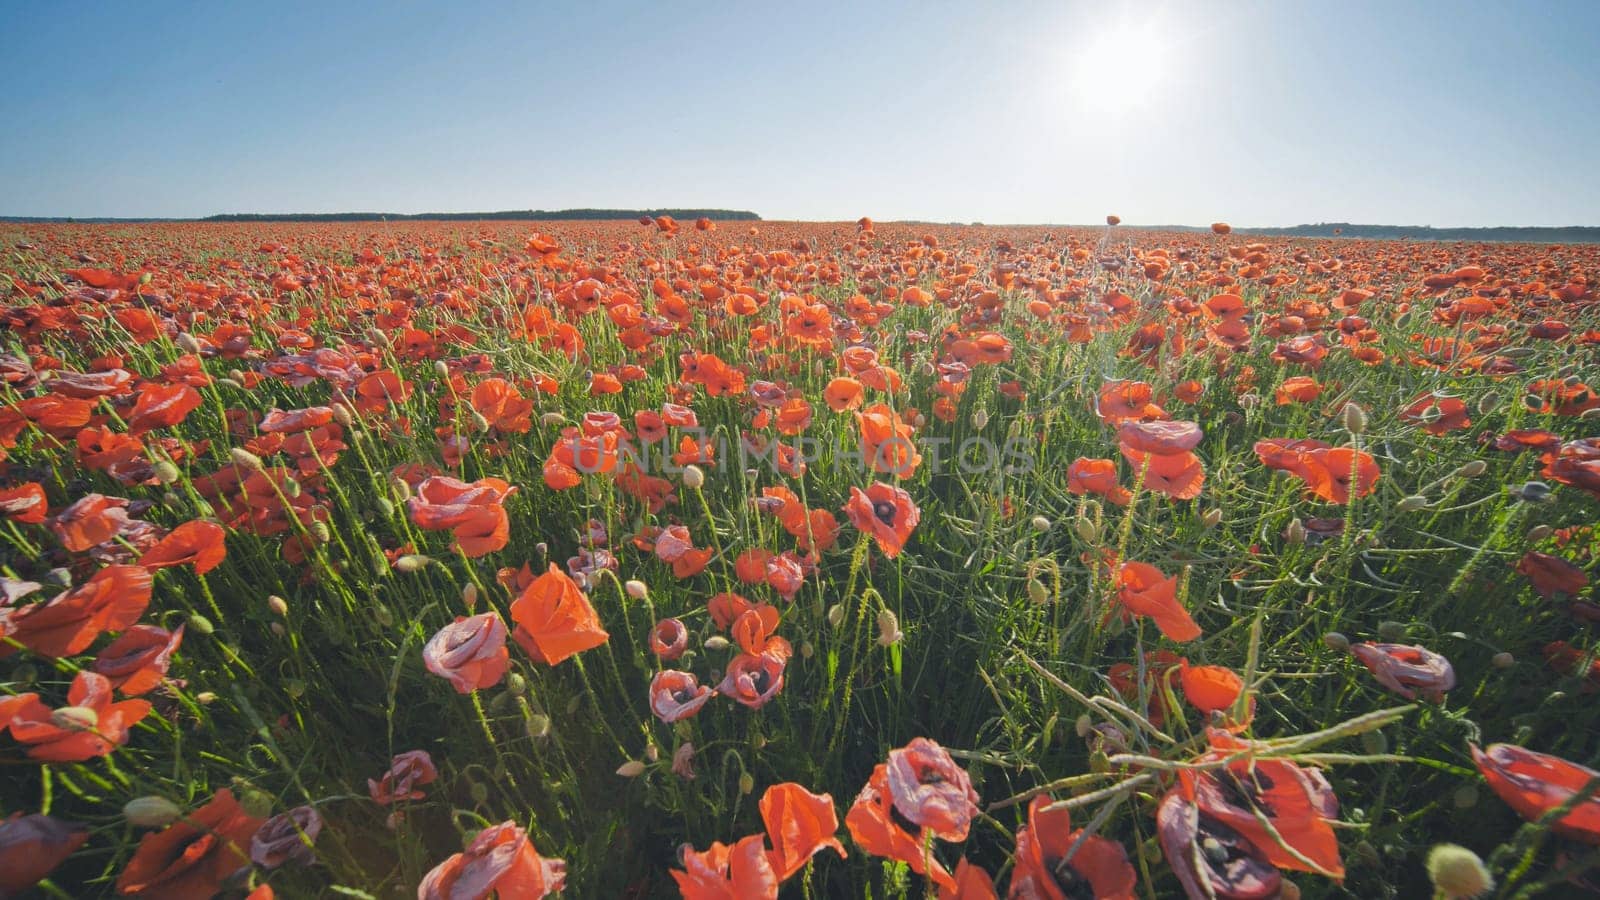 A large field of red poppy flowers at sunset